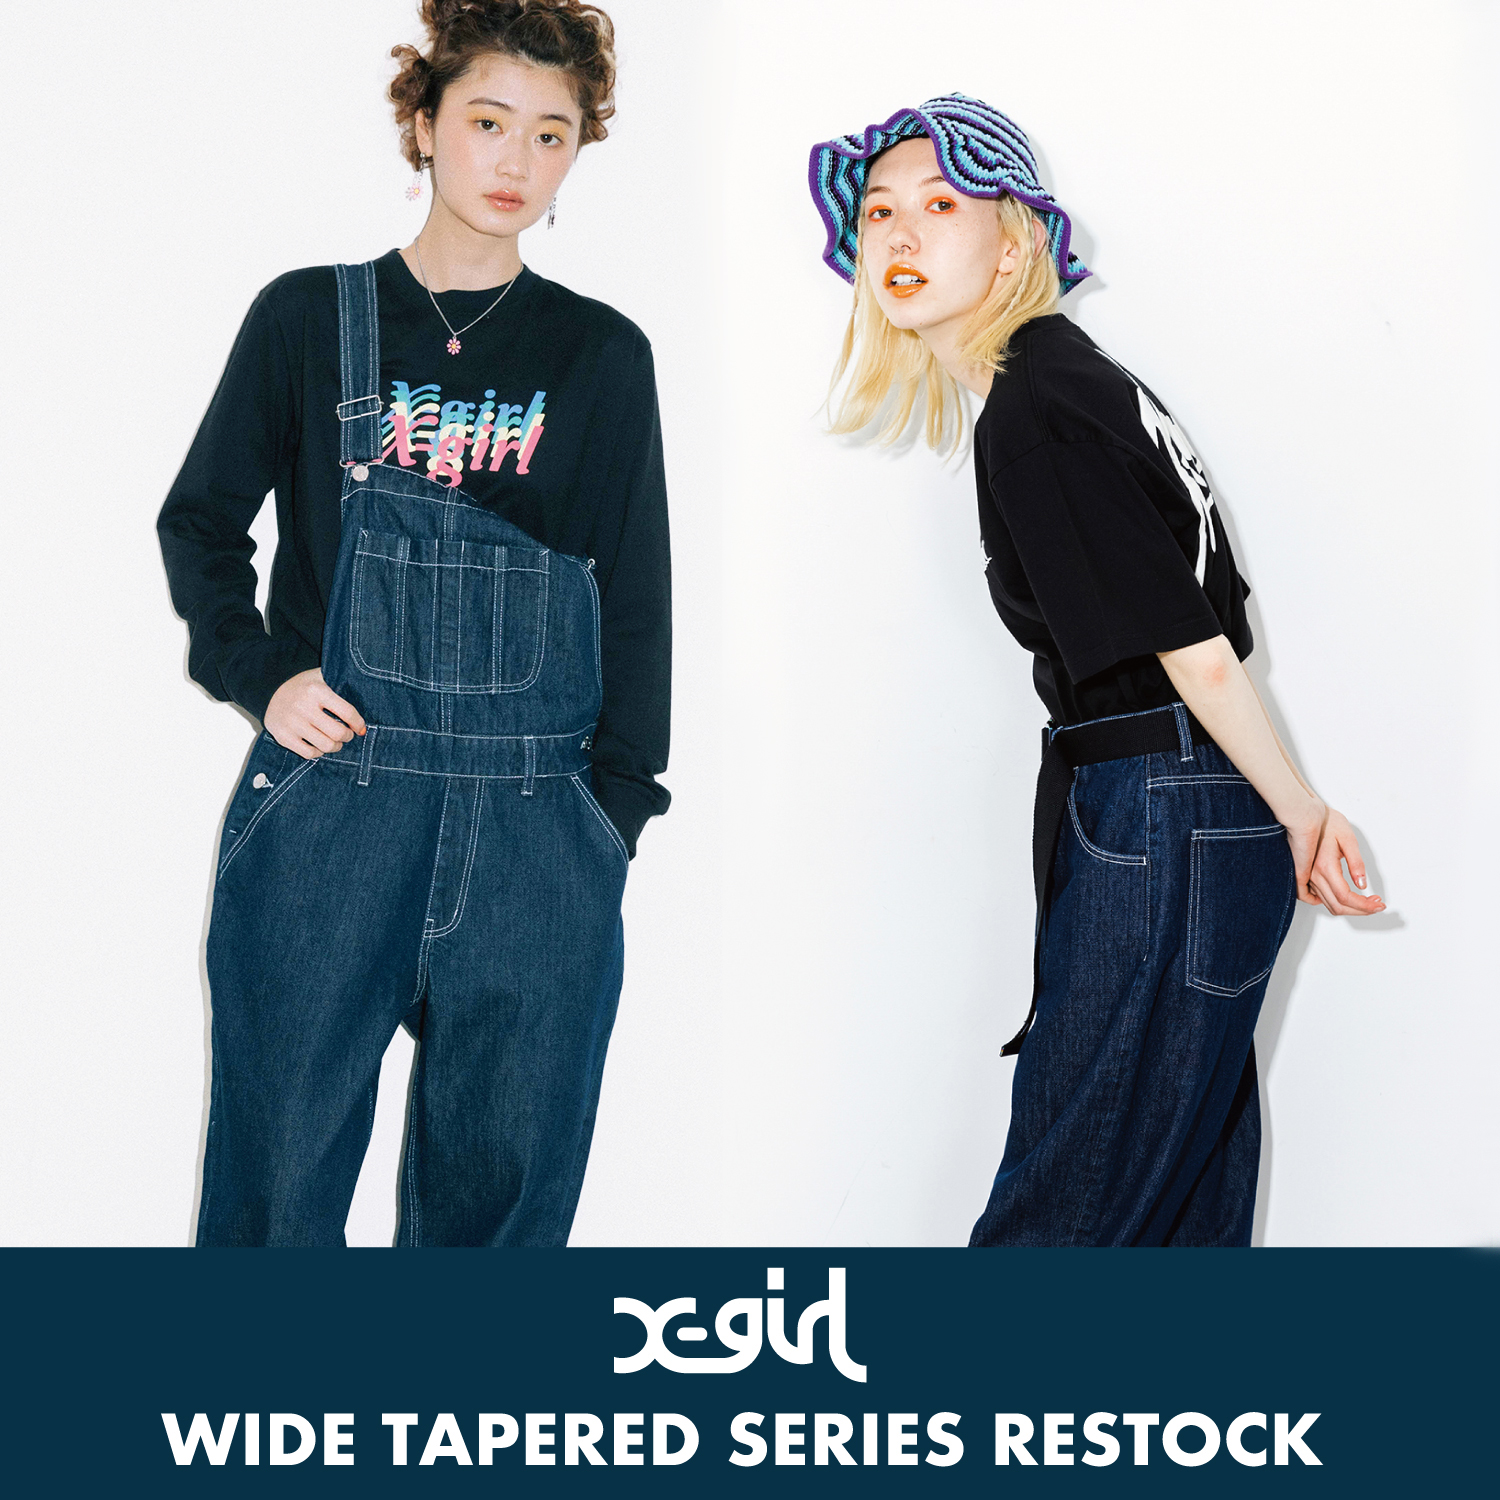 RESTOCK】WIDE TAPERED SERIES | NEWS | X-girl OFFICIAL SITE 